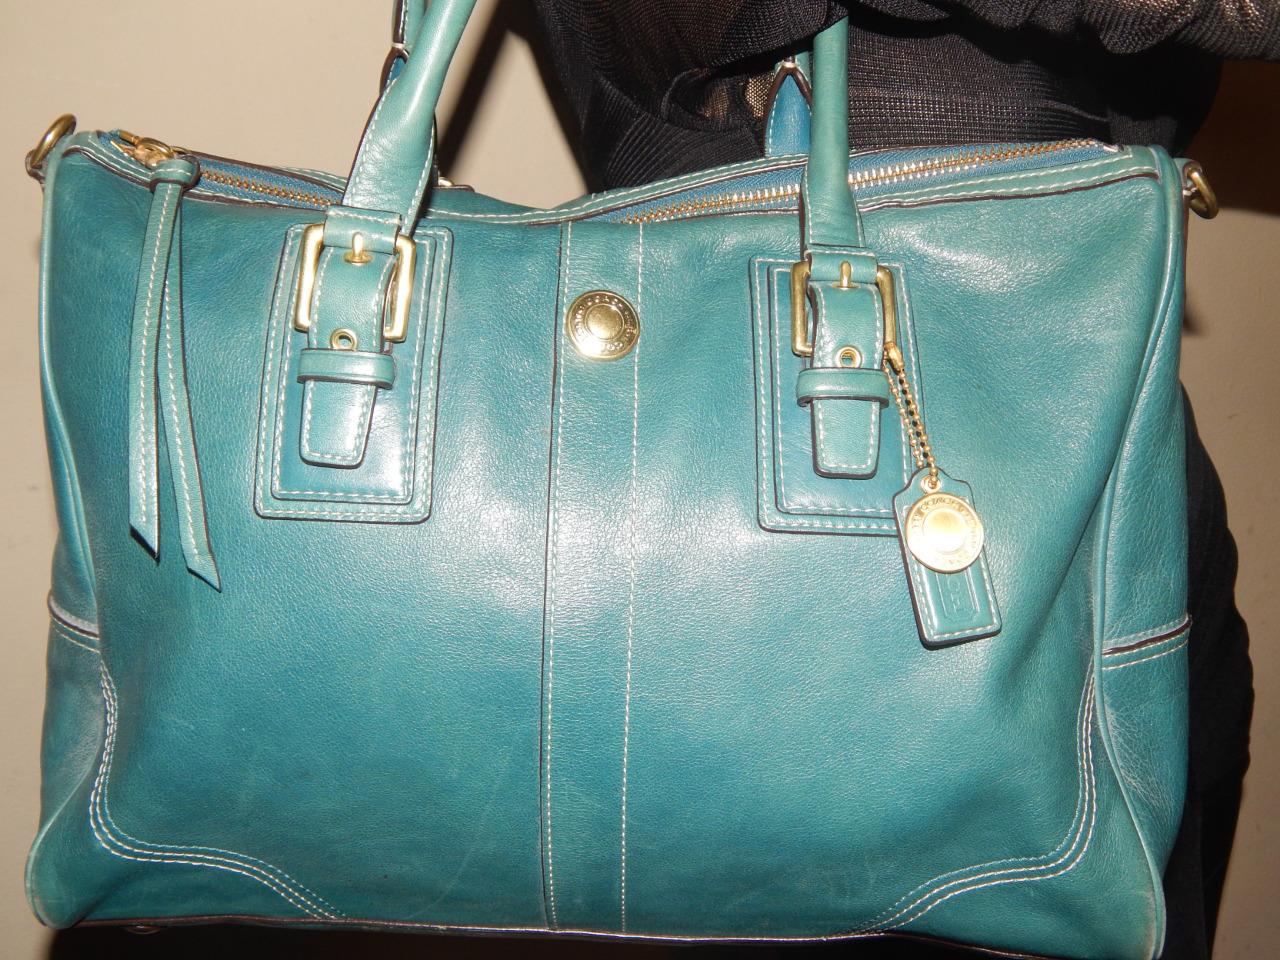 COACH 13996 Large Turquoise Tote Double Handle Carryall Purse Handbag ...